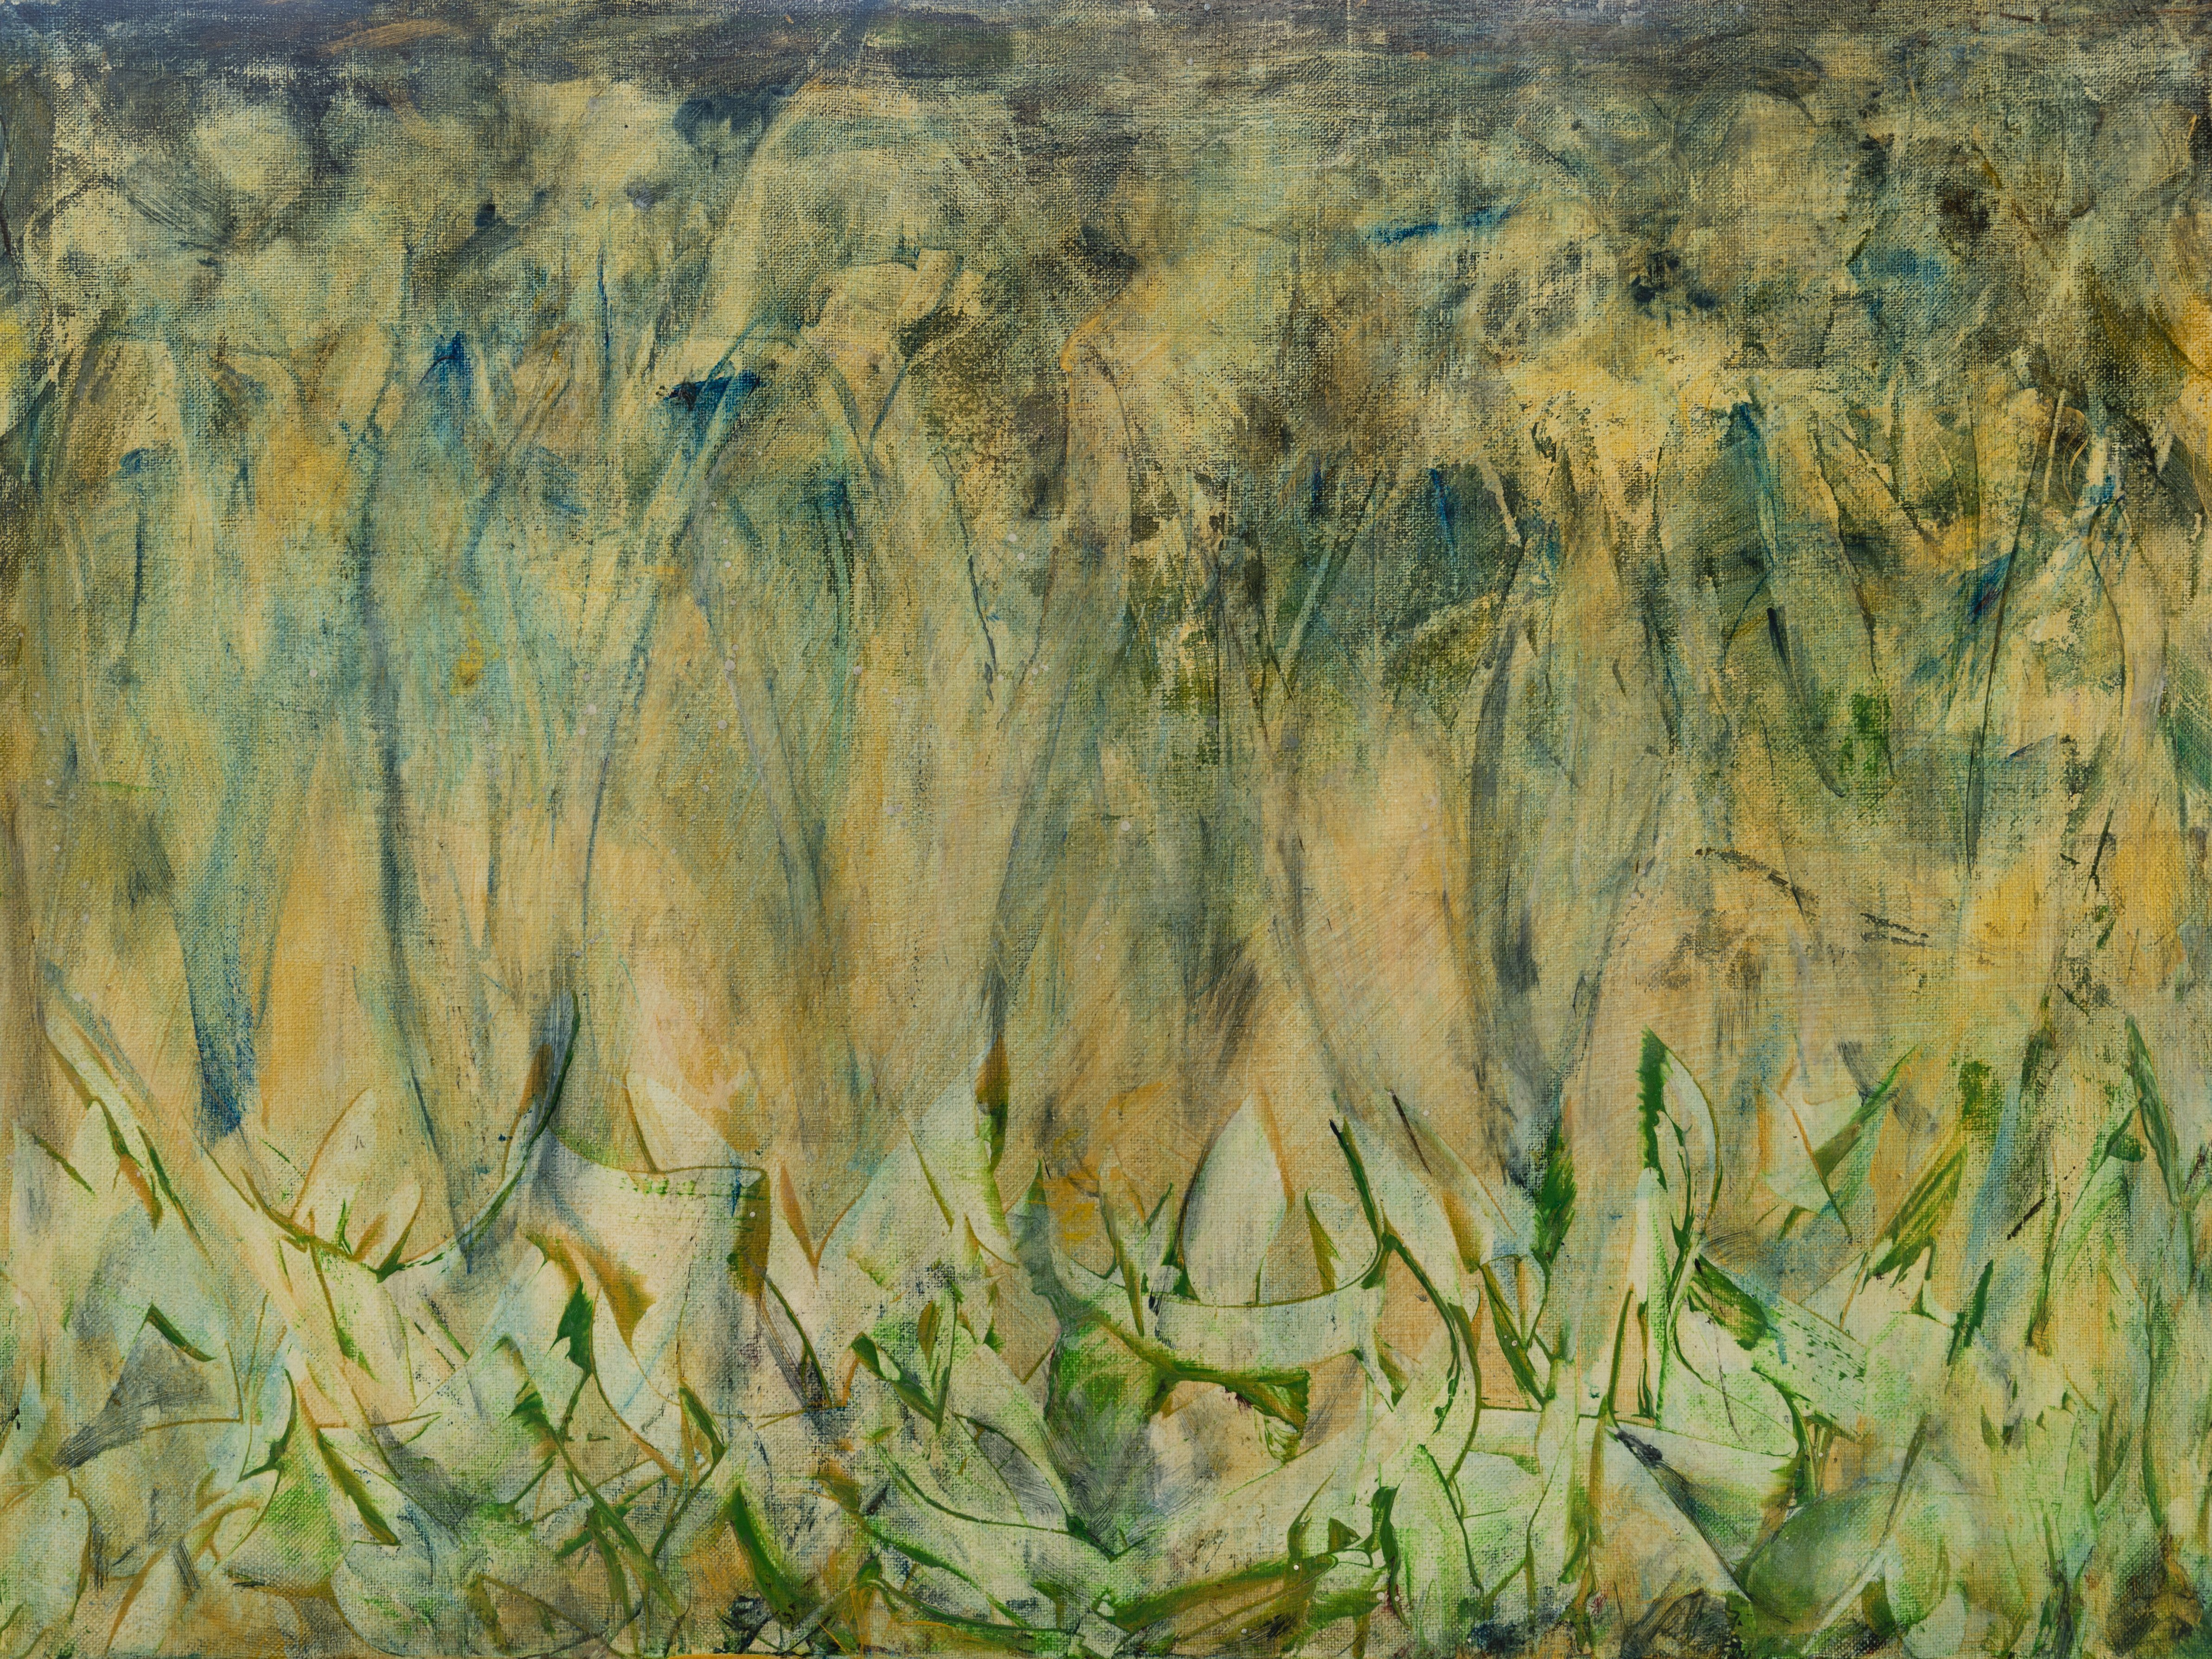 Caren Keyser; Golden Mist, 2019, Original Painting Acrylic, 24 x 18 inches. Artwork description: 241 In this is an abstract painting figures seem to appear through a golden mist.  The greenery in the foreground is like blades of grass or shrubbery.  See what you will, it is an interesting painting.  Greens, blues and golds are enmeshed in the fibers of the canvas ...